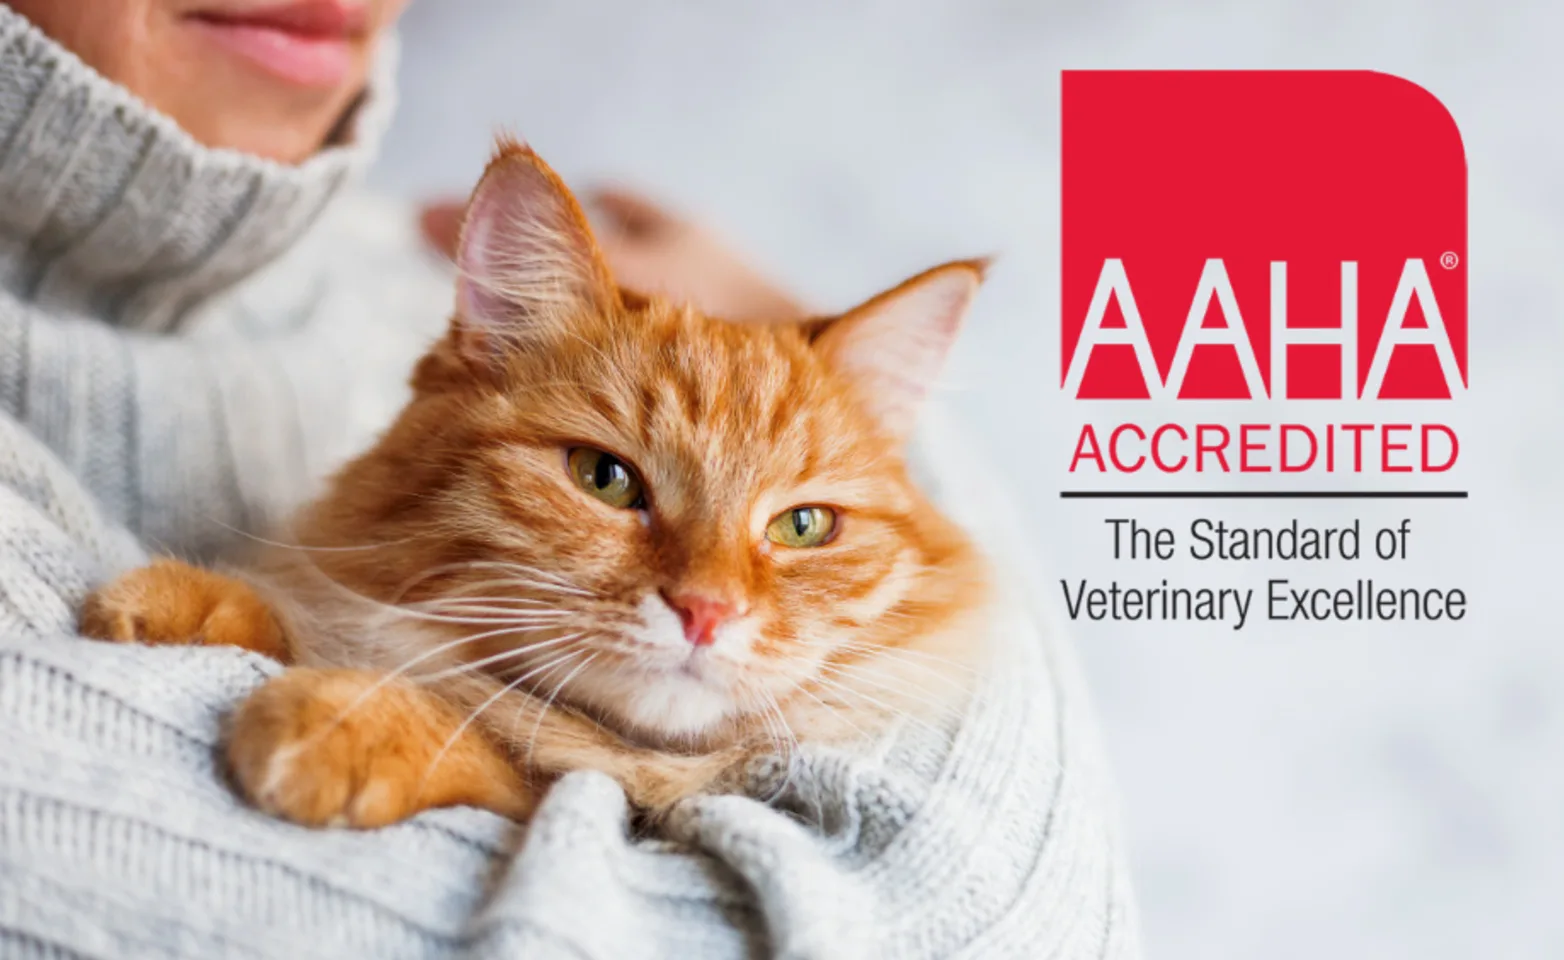 AAHA Accredited - Cat in Woman's Arms